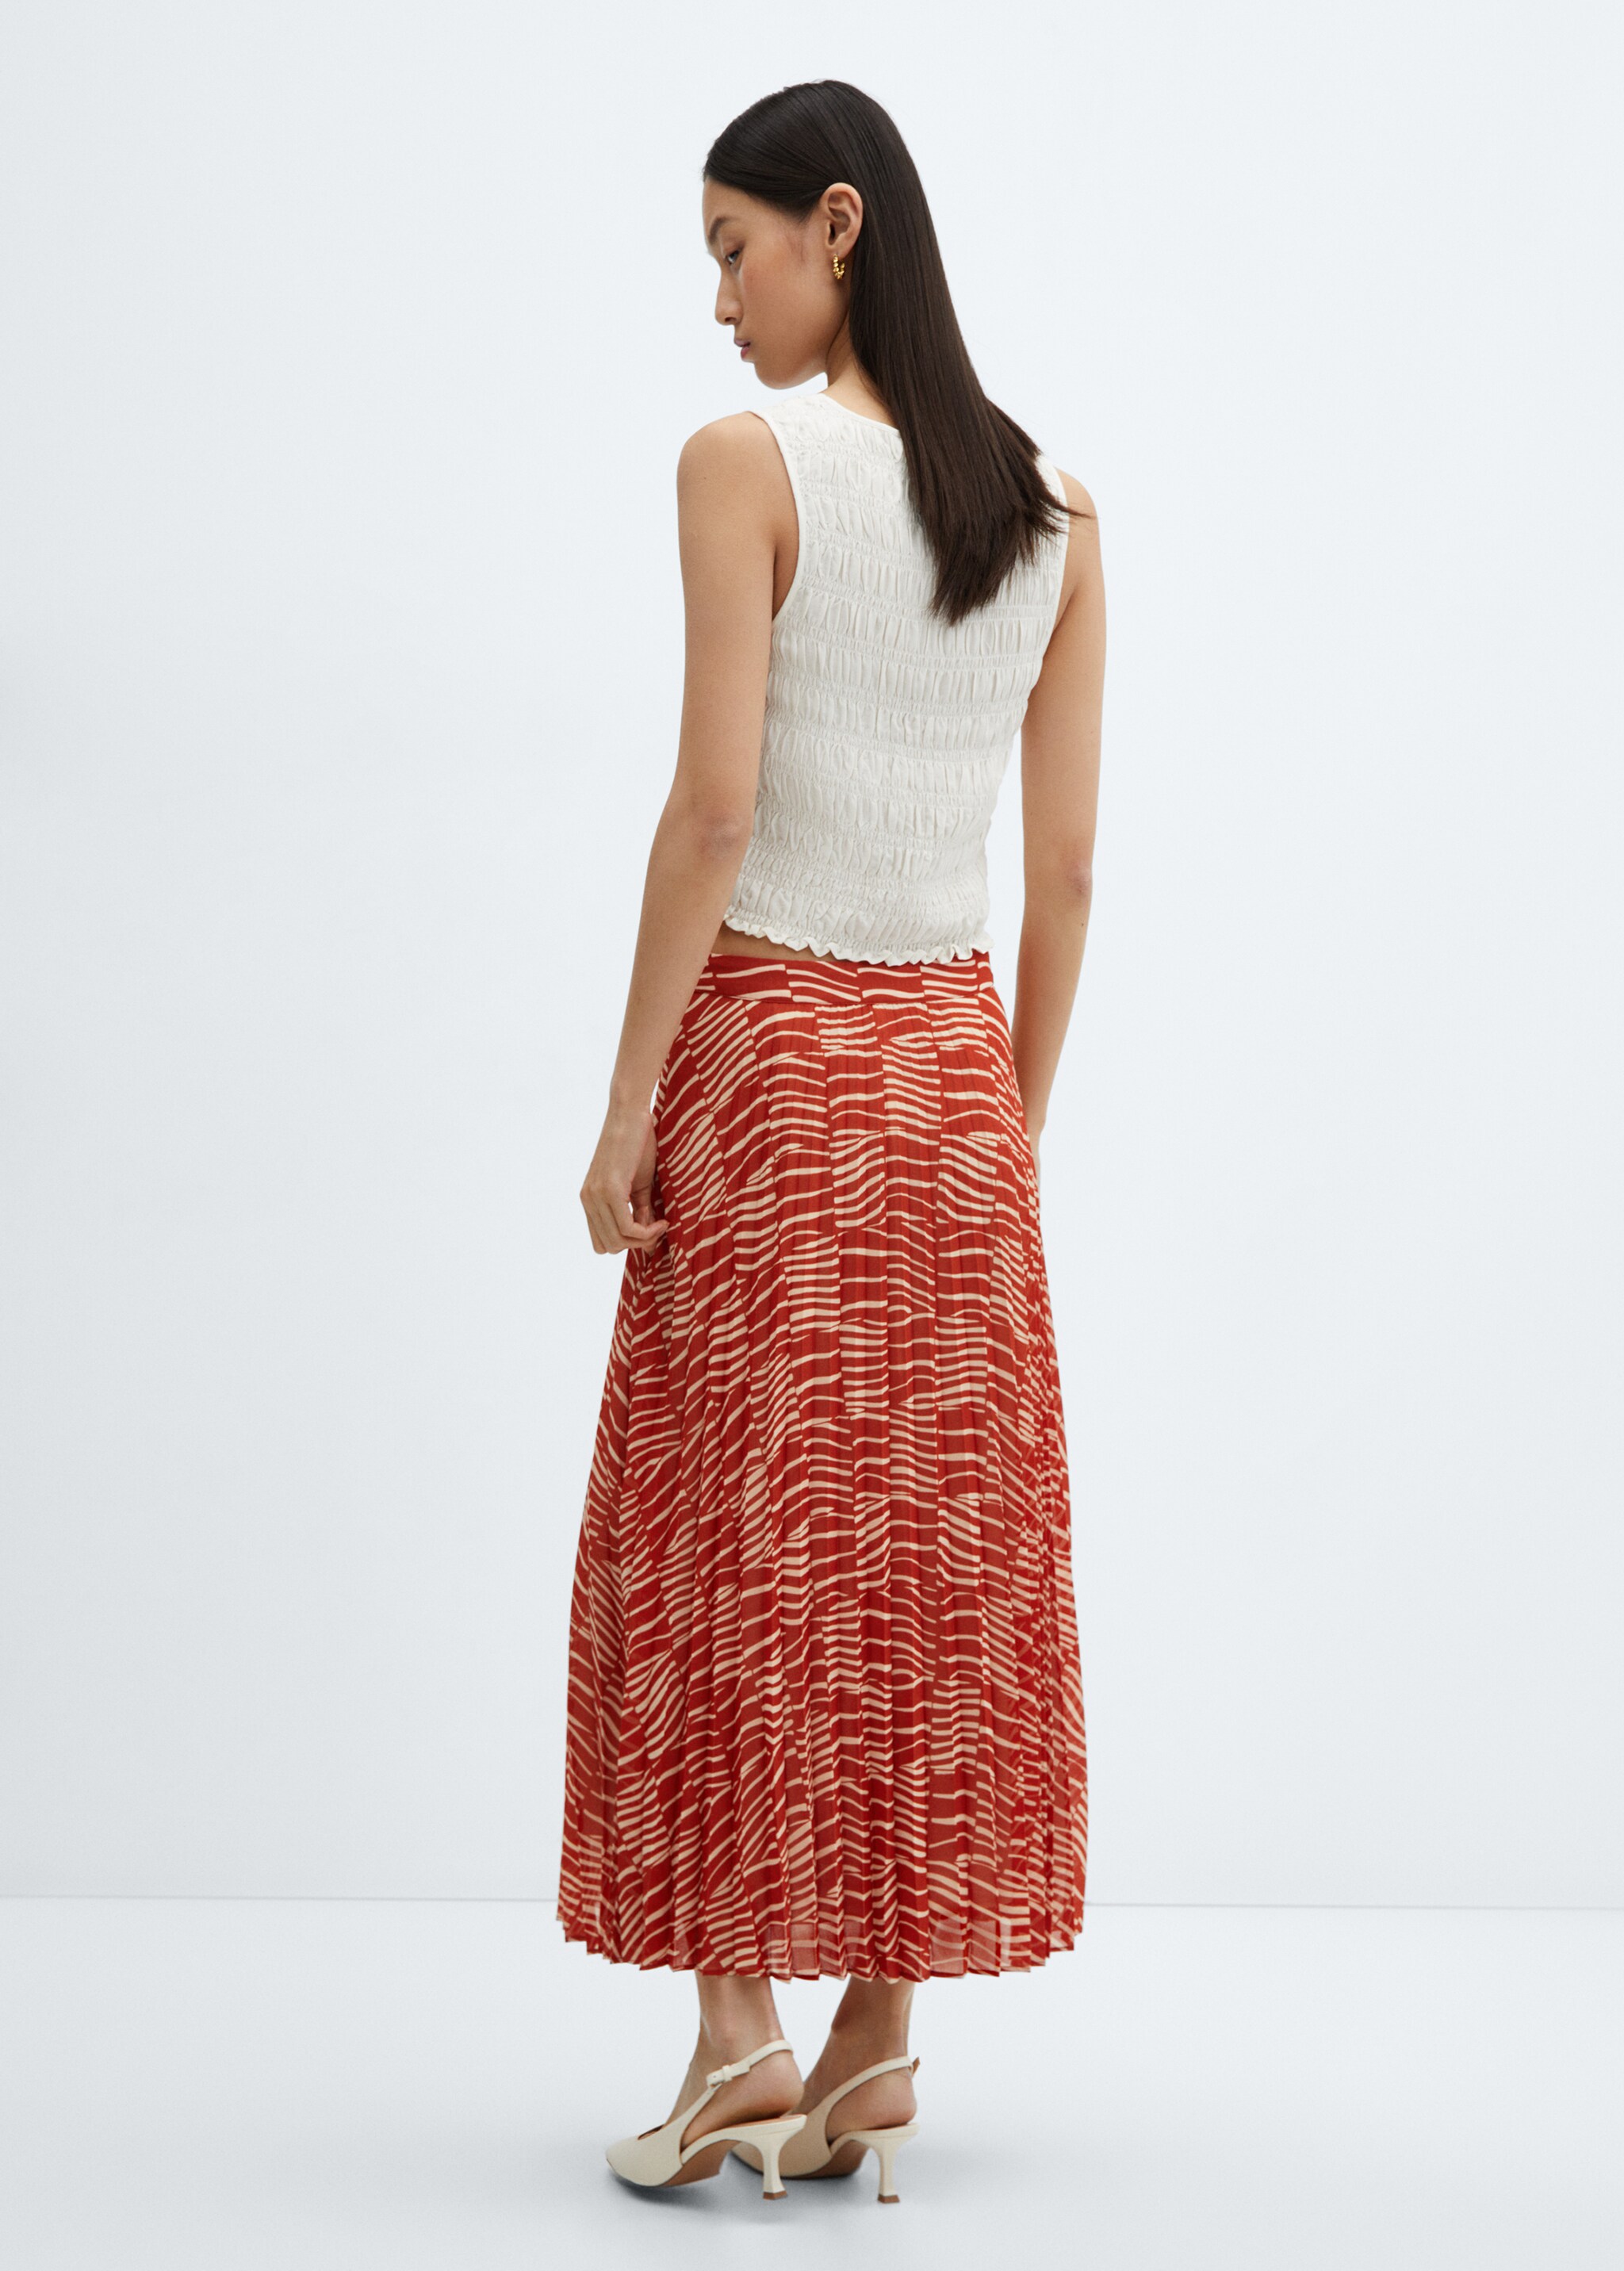 Printed pleated skirt - Reverse of the article